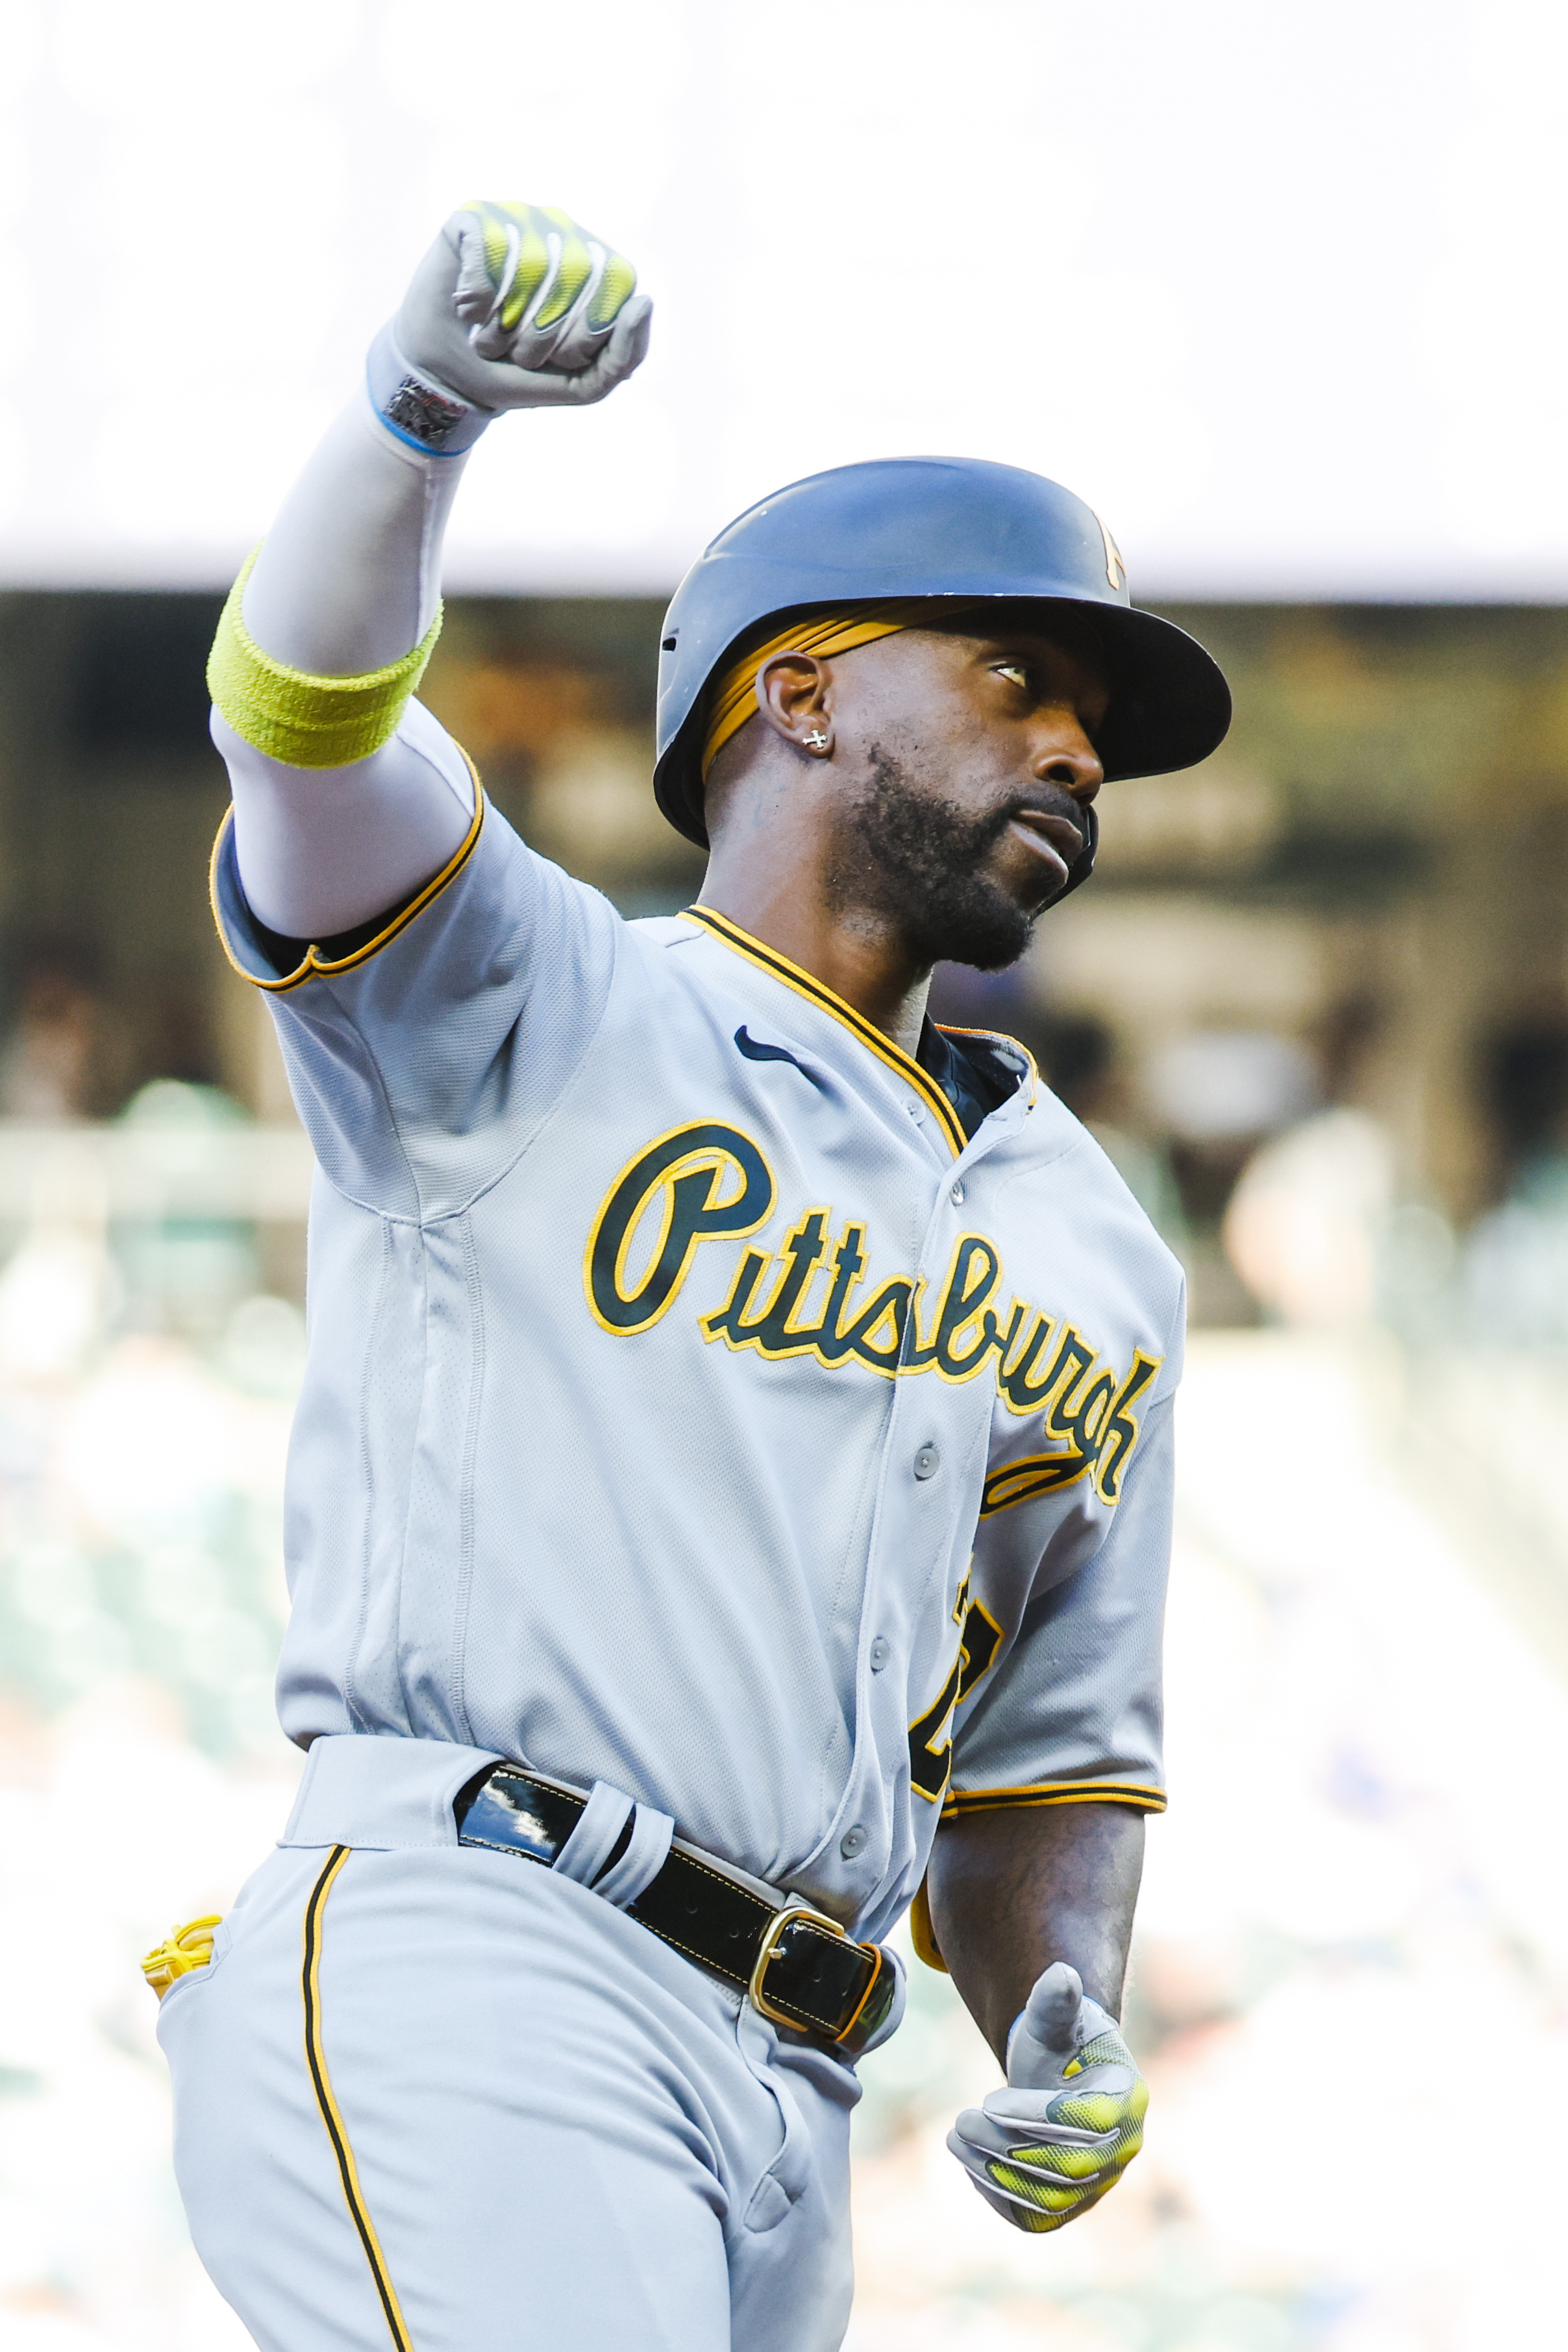 McCutchen sparks record-tying home run barrage as Pirates sink Mariners  11-6 - The San Diego Union-Tribune